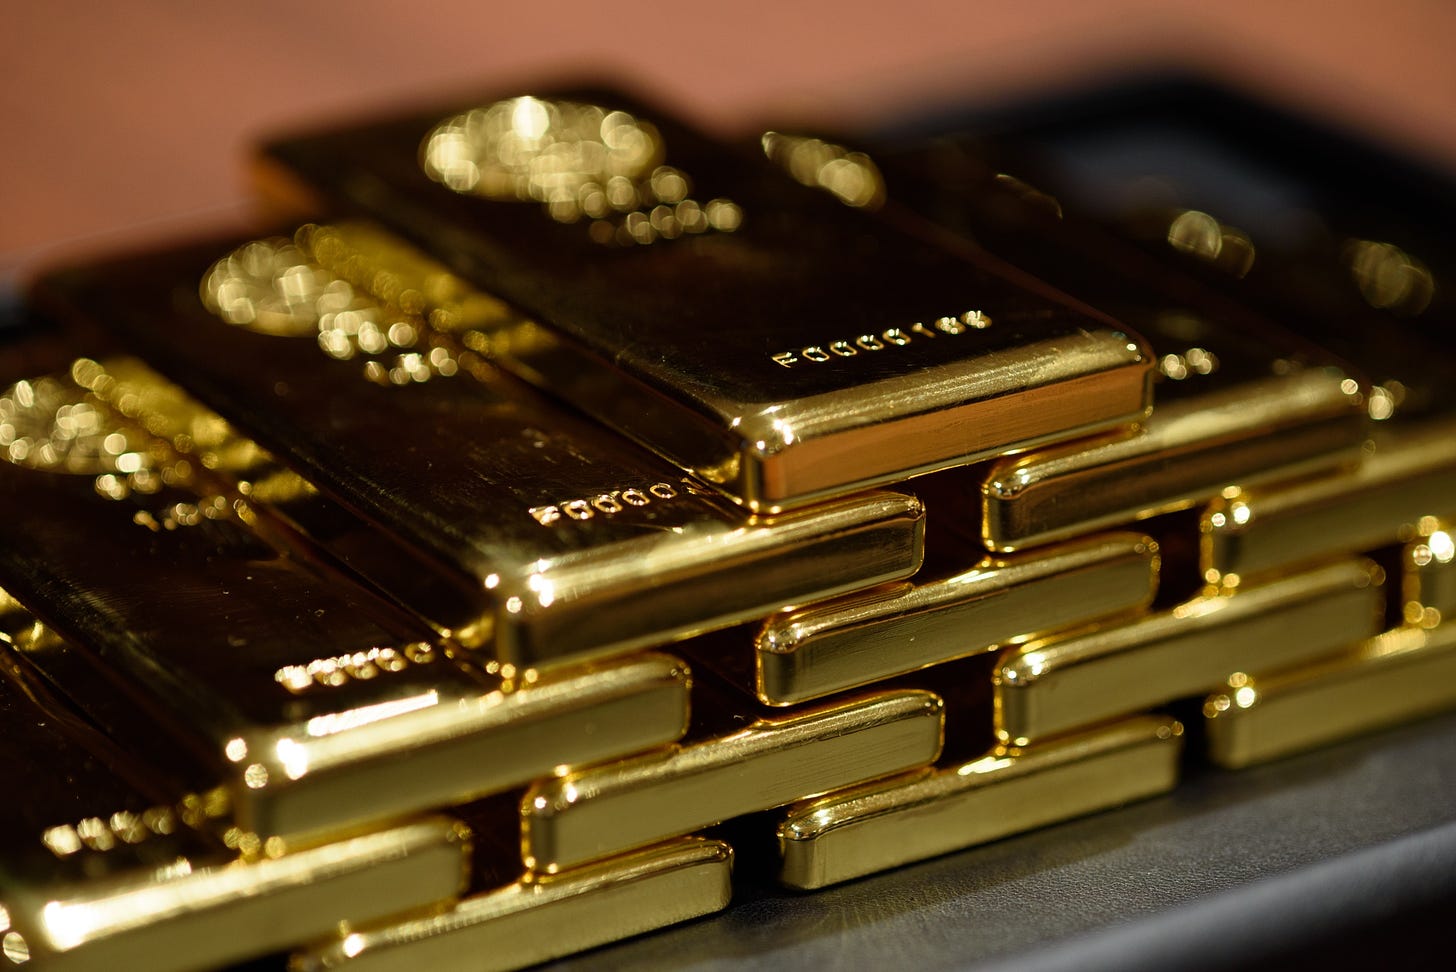 When a Hot Gold Trade Blew Up, the Rush for 100-Ounce Bars Began - Bloomberg